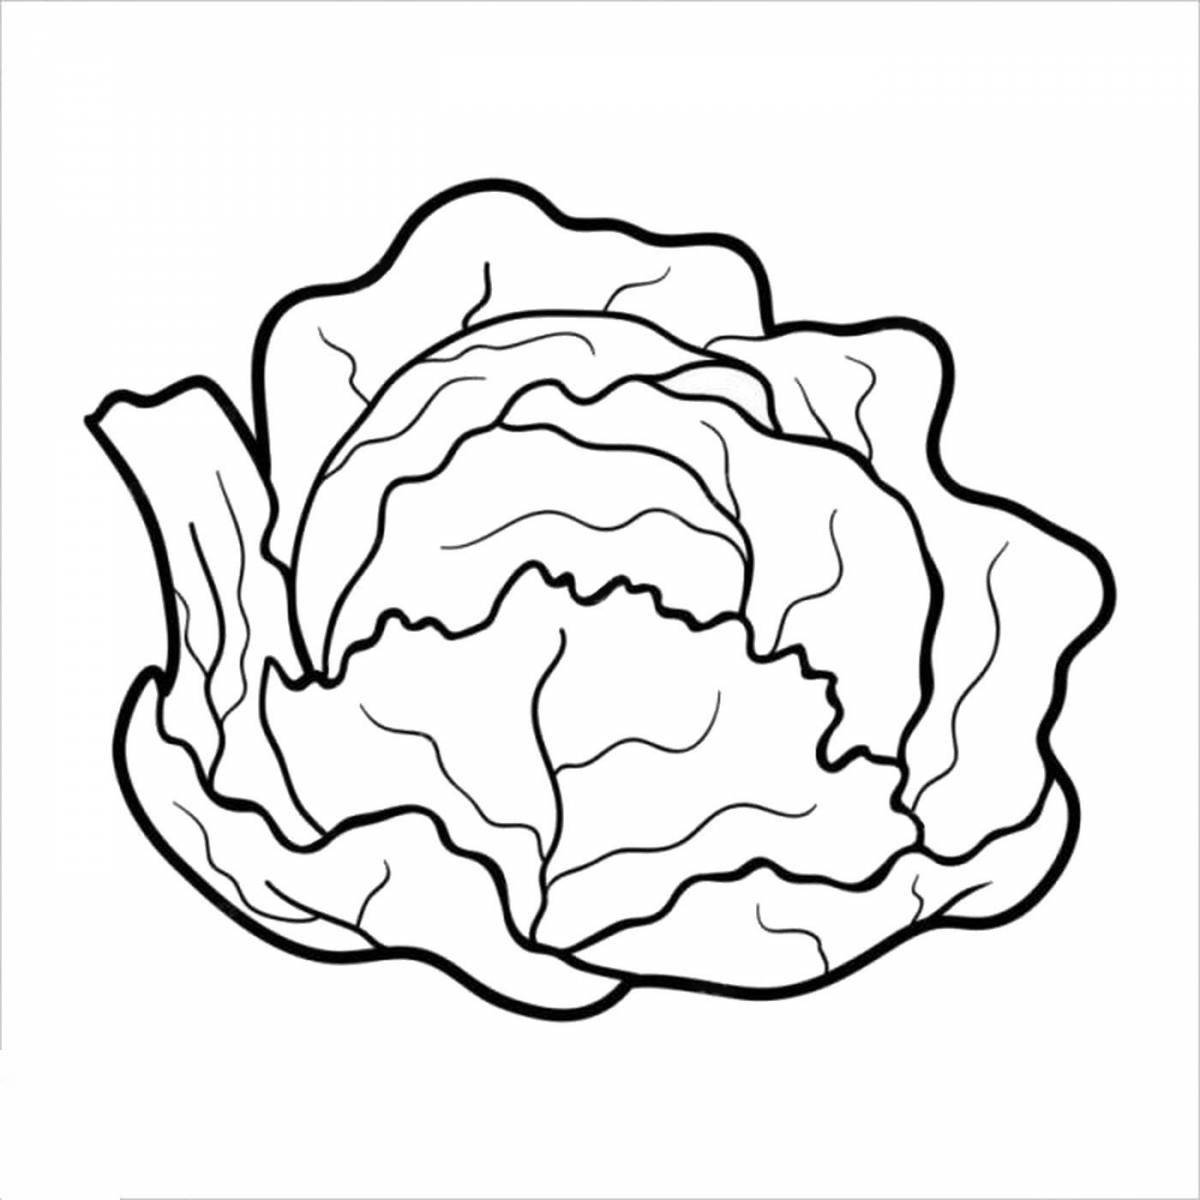 Adorable cabbage pattern for kids